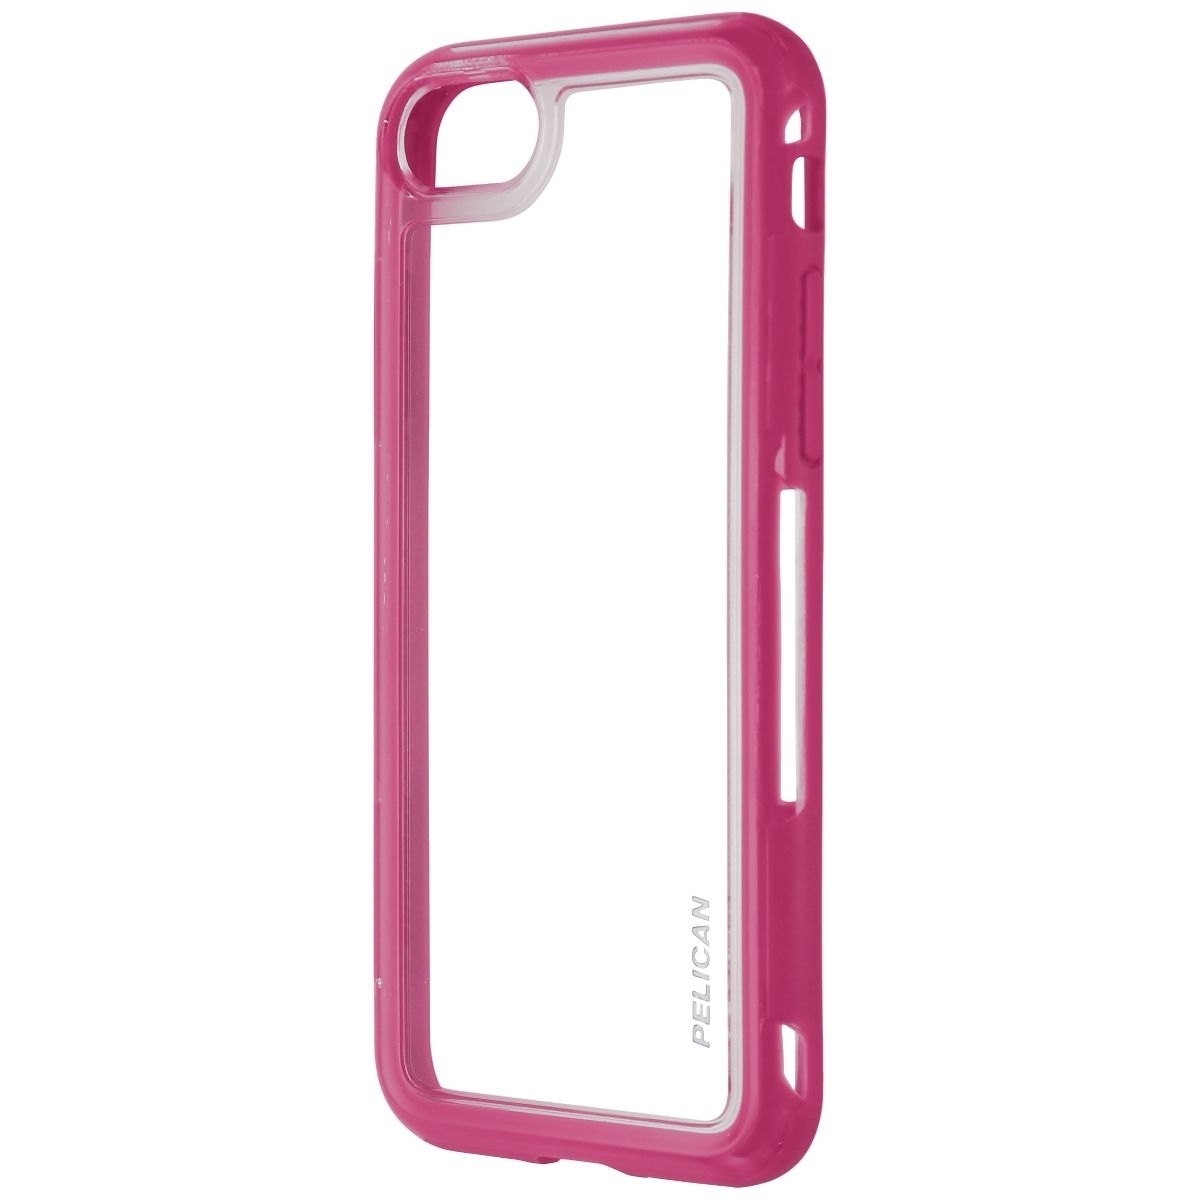 Pelican Adventurer Clear Series Hard Case For Apple IPhone 7 - Clear/Pink